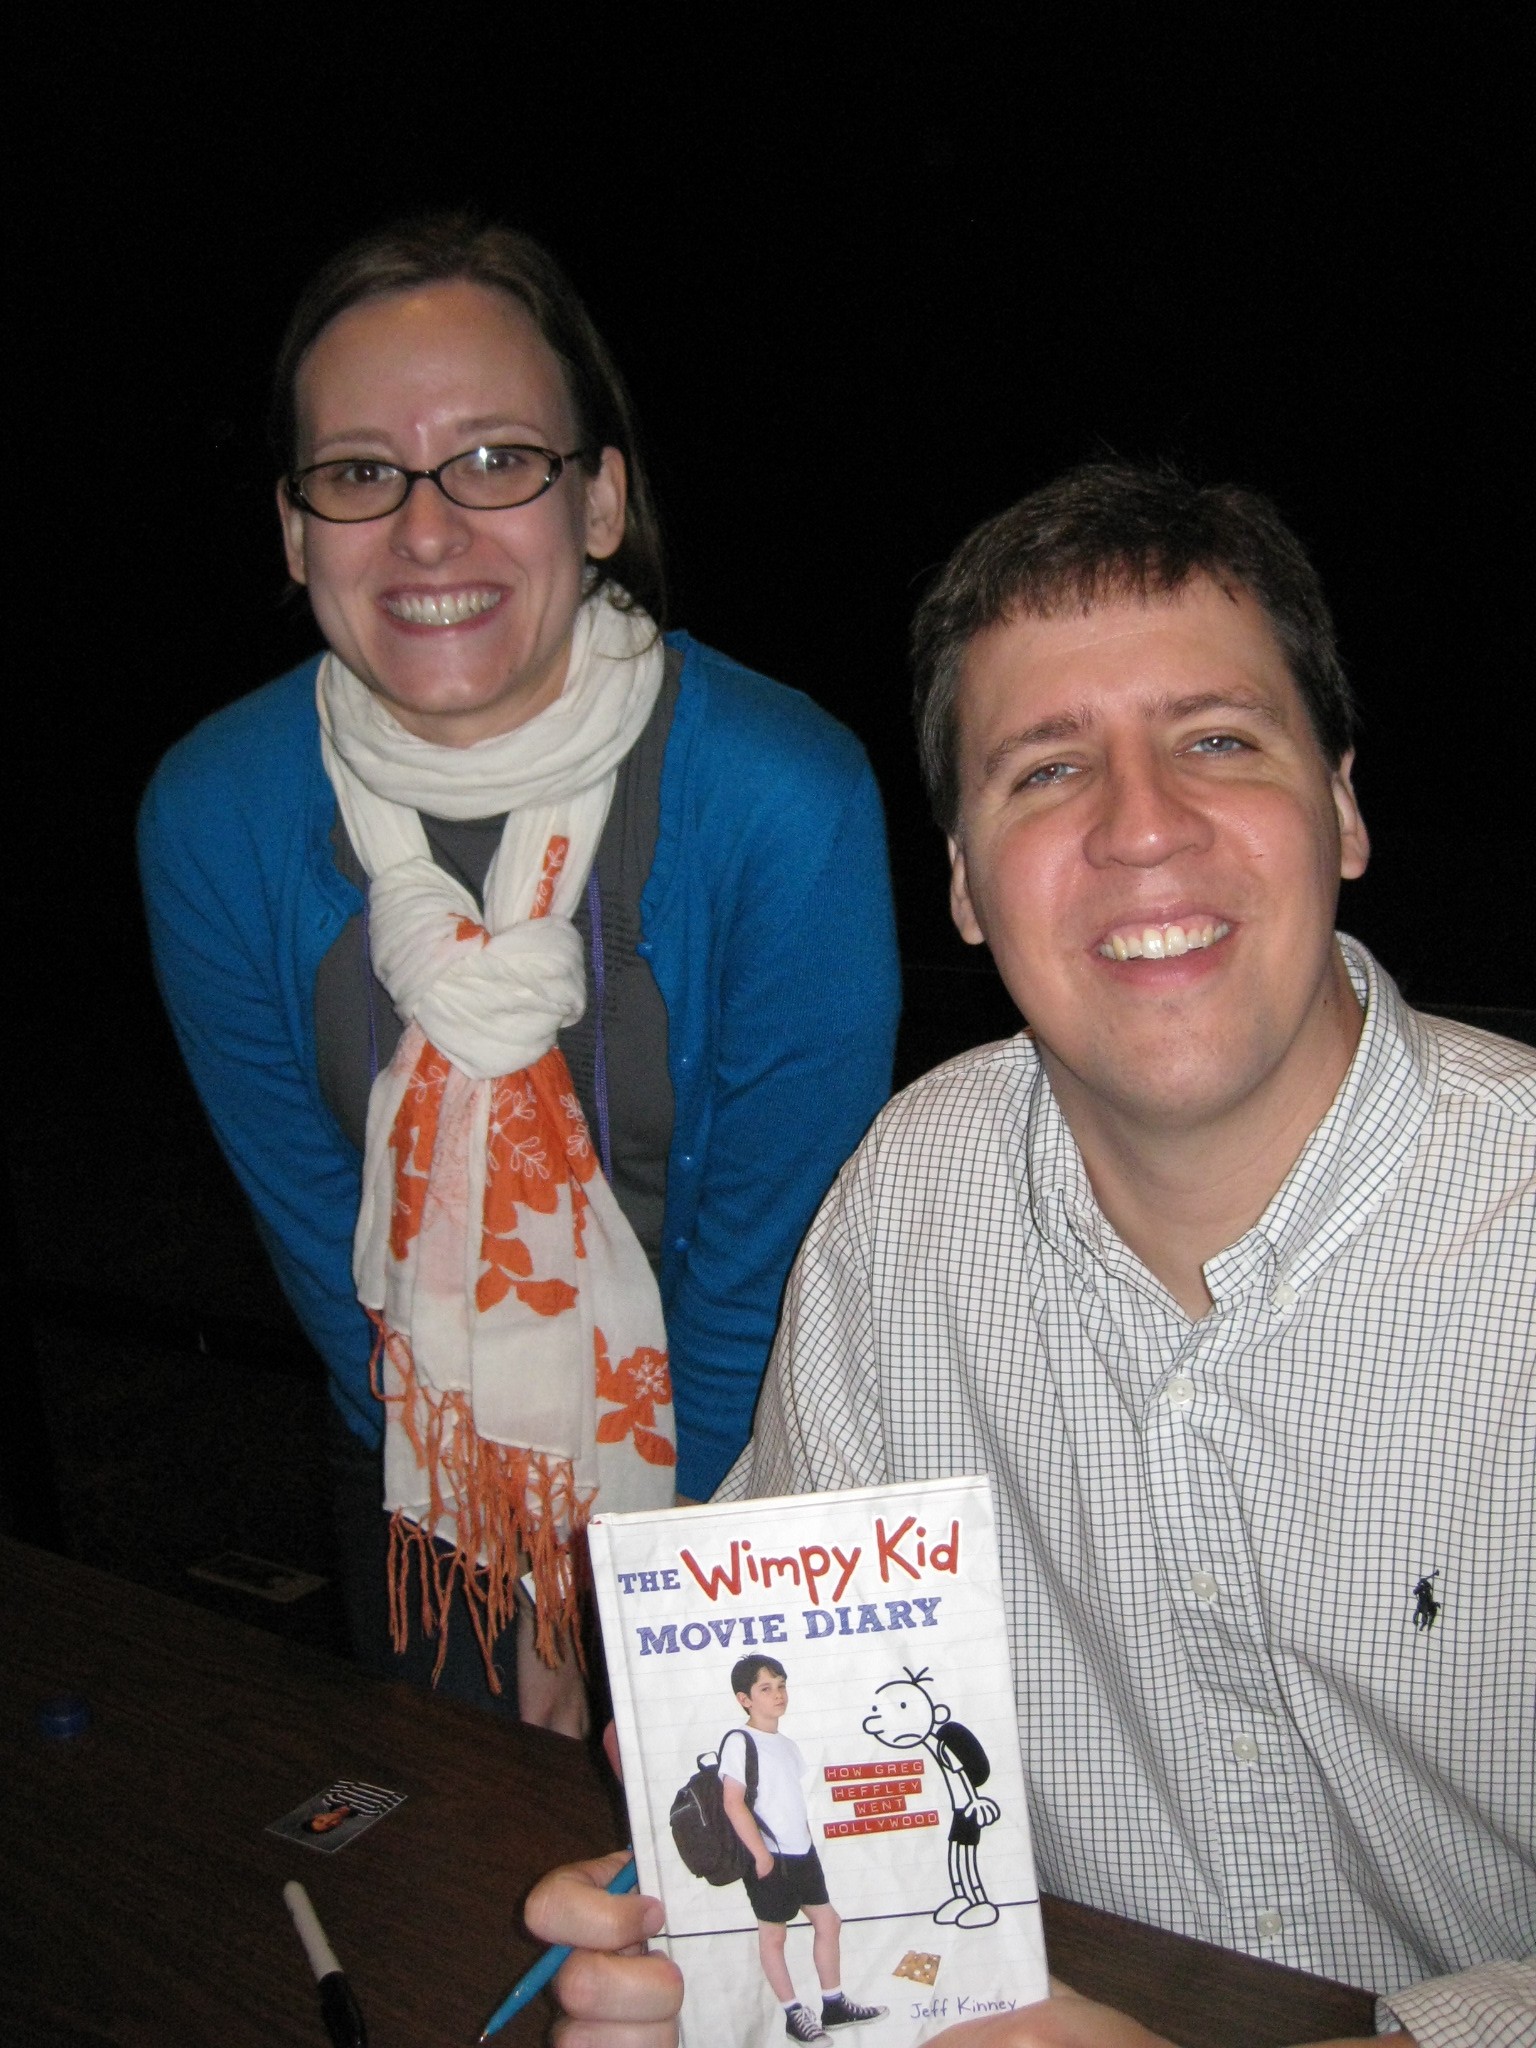 LibraryLea and Jeff Kinney